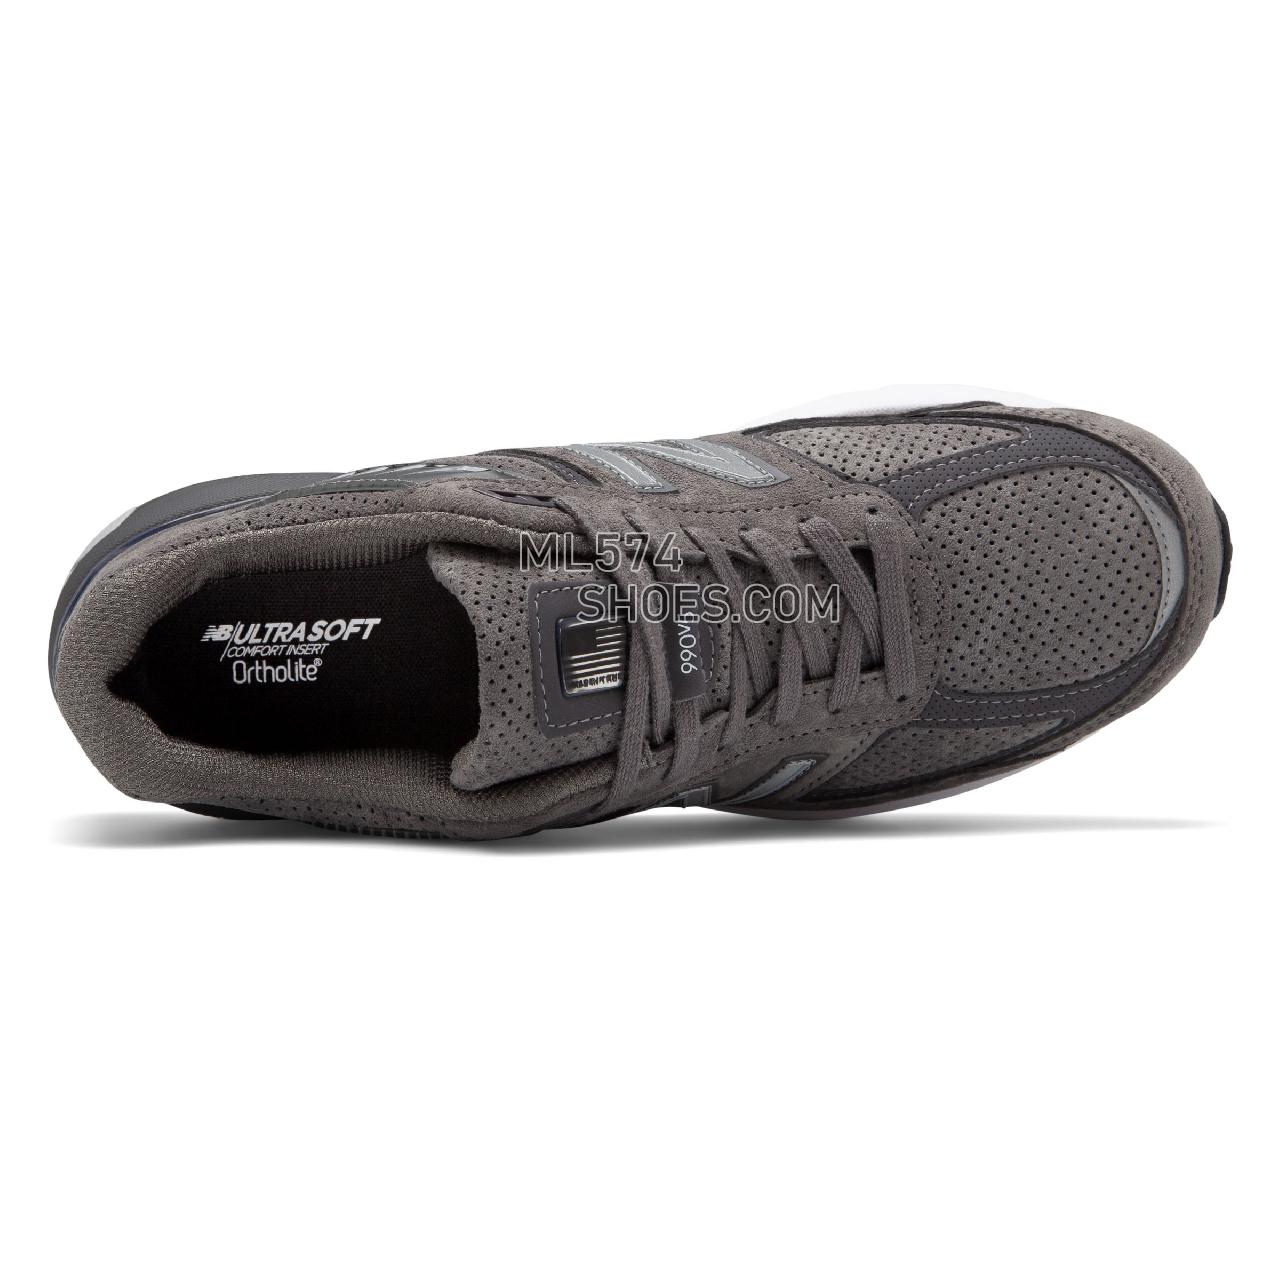 New Balance Made in US 990v5 - Men's Made in US 990v5 - Castlerock with Magnet and White - M990SG5